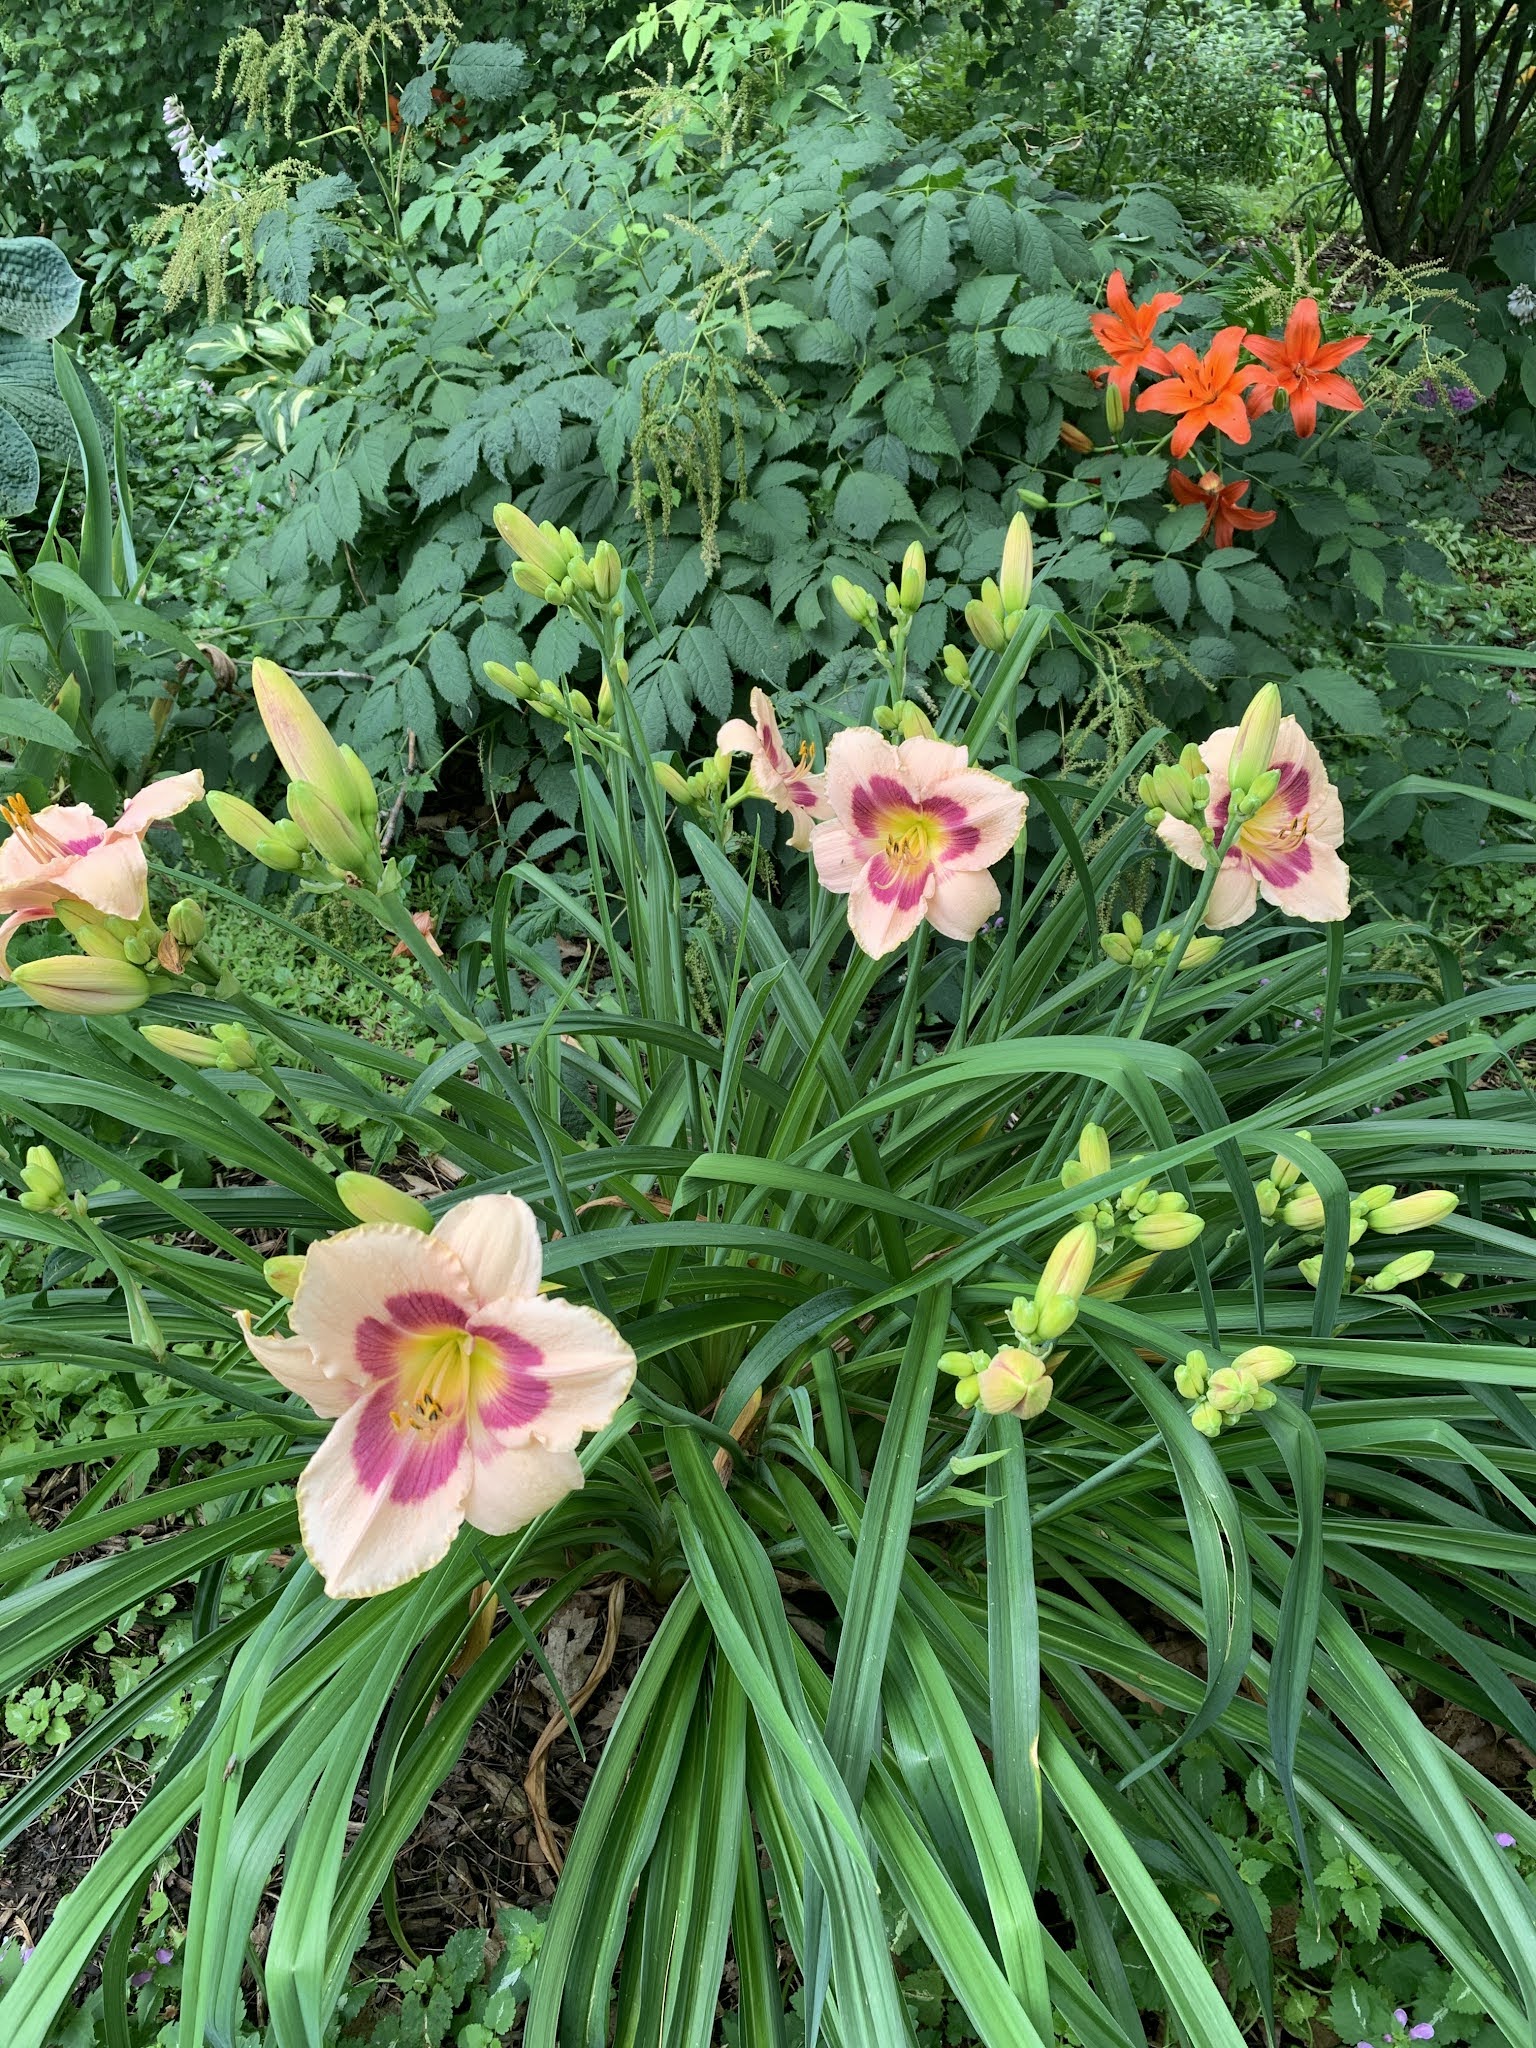 Amy's Creative Pursuits: July Blooms and A Peek At My Vegetable Garden